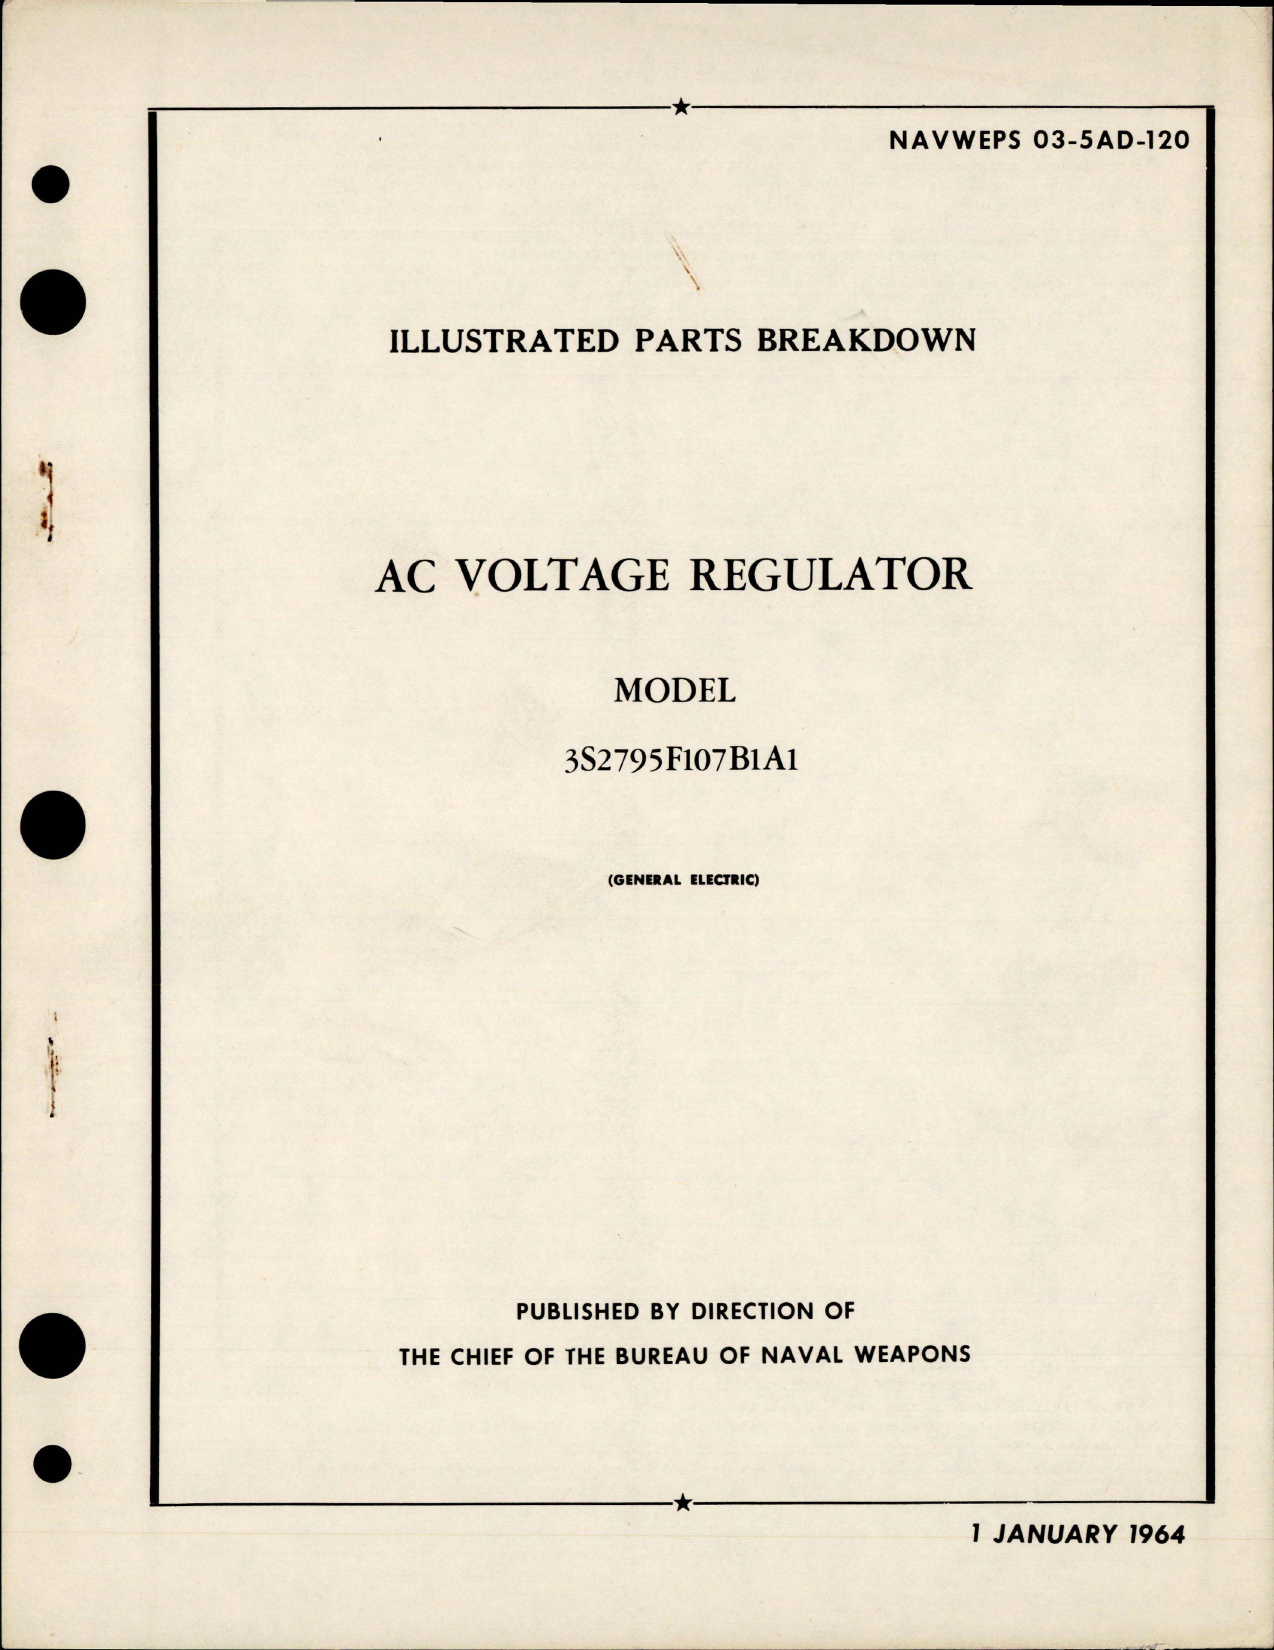 Sample page 1 from AirCorps Library document: Illustrated Parts Breakdown for AC Voltage Regulator - Model 3DS2795F107B1A1 